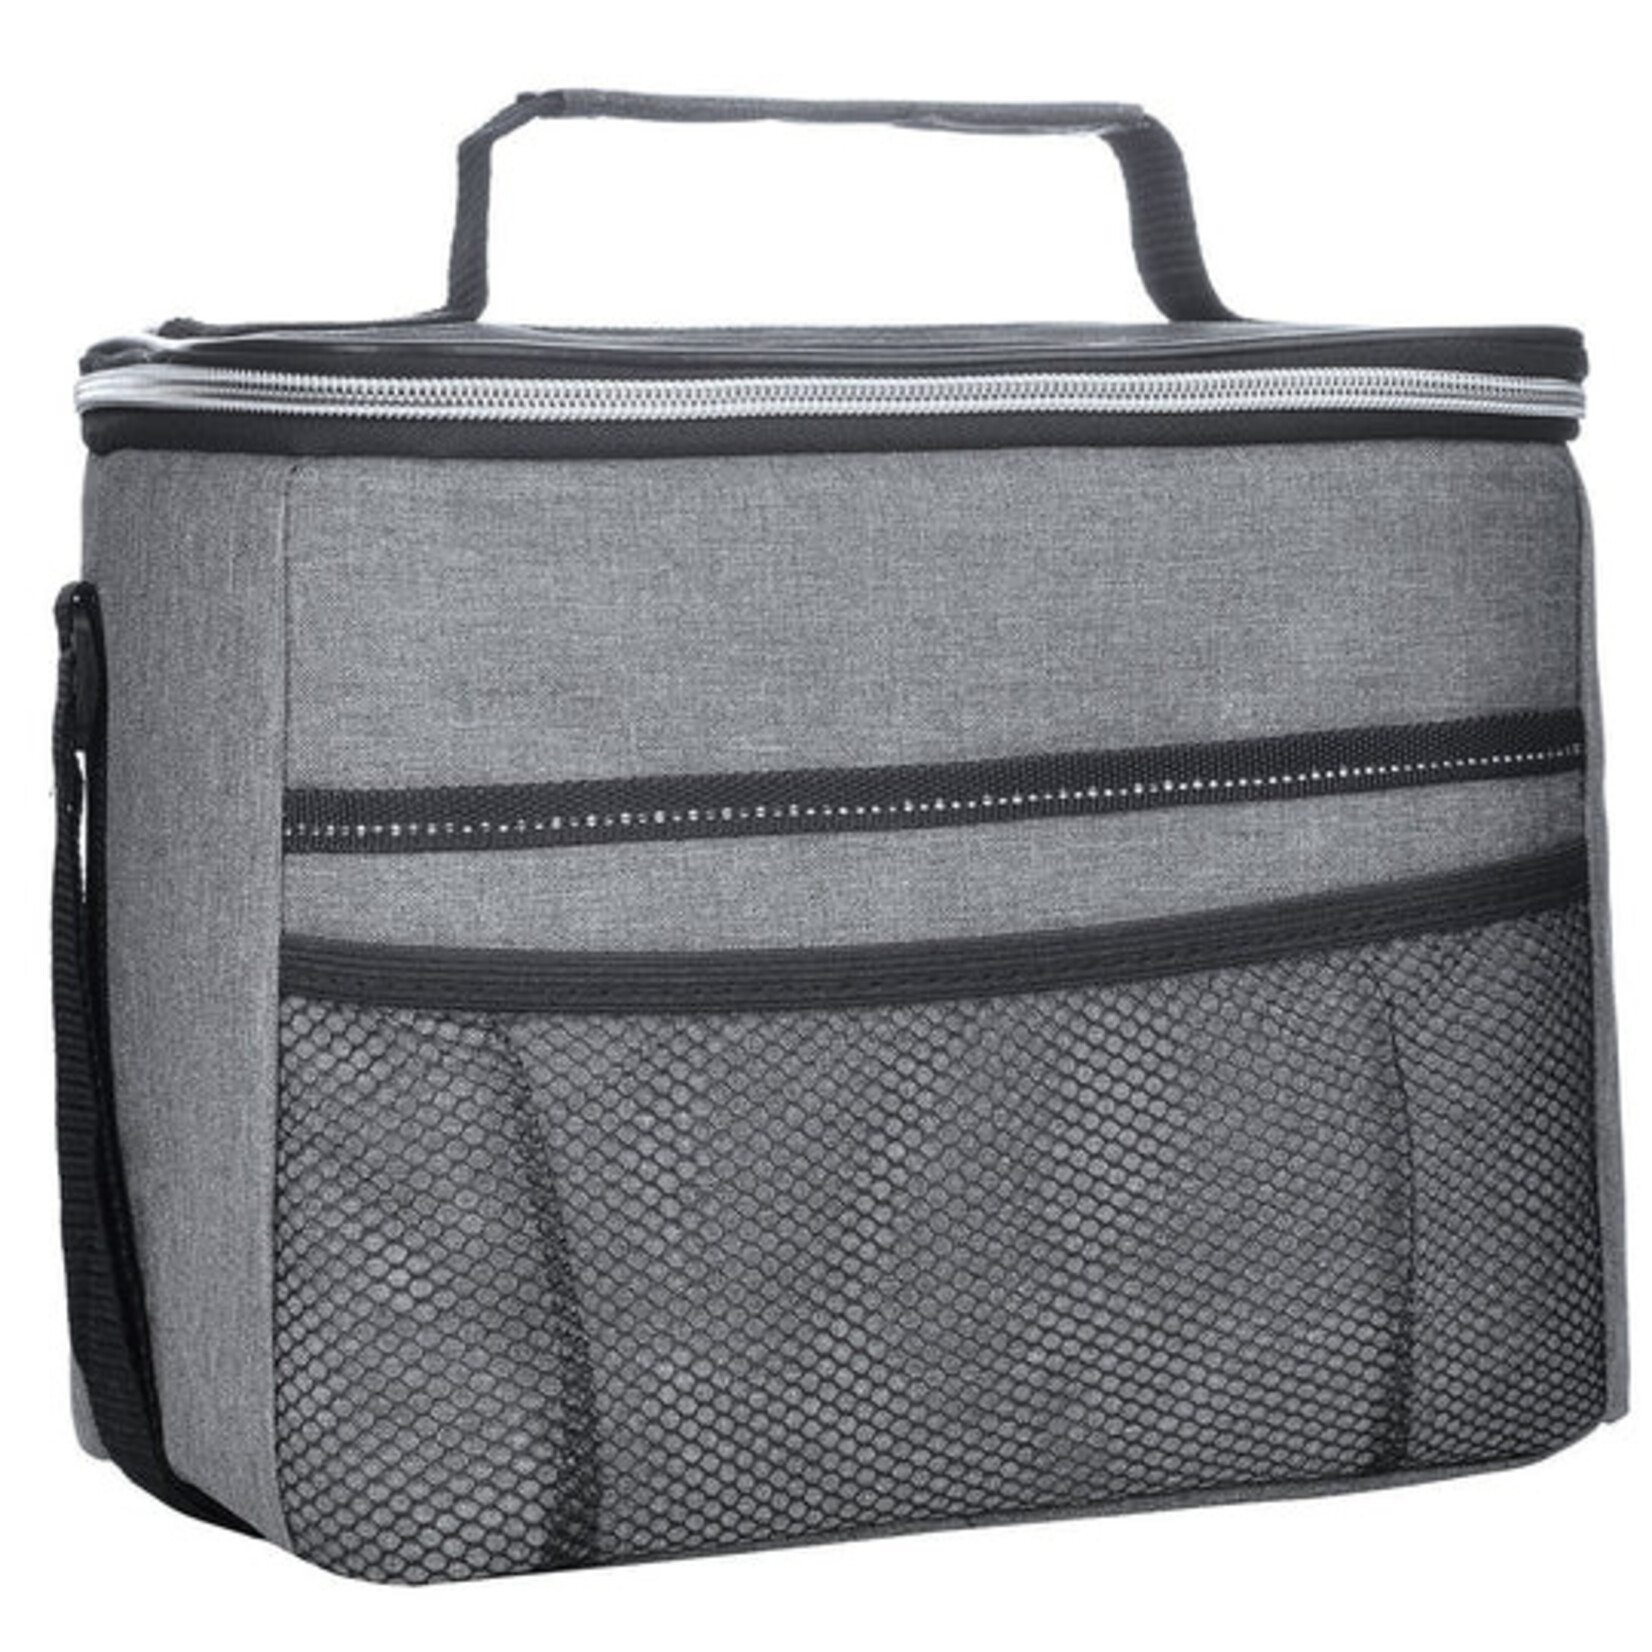 Mad Man Insulated Hot/Cold Cooler Bag- Gray